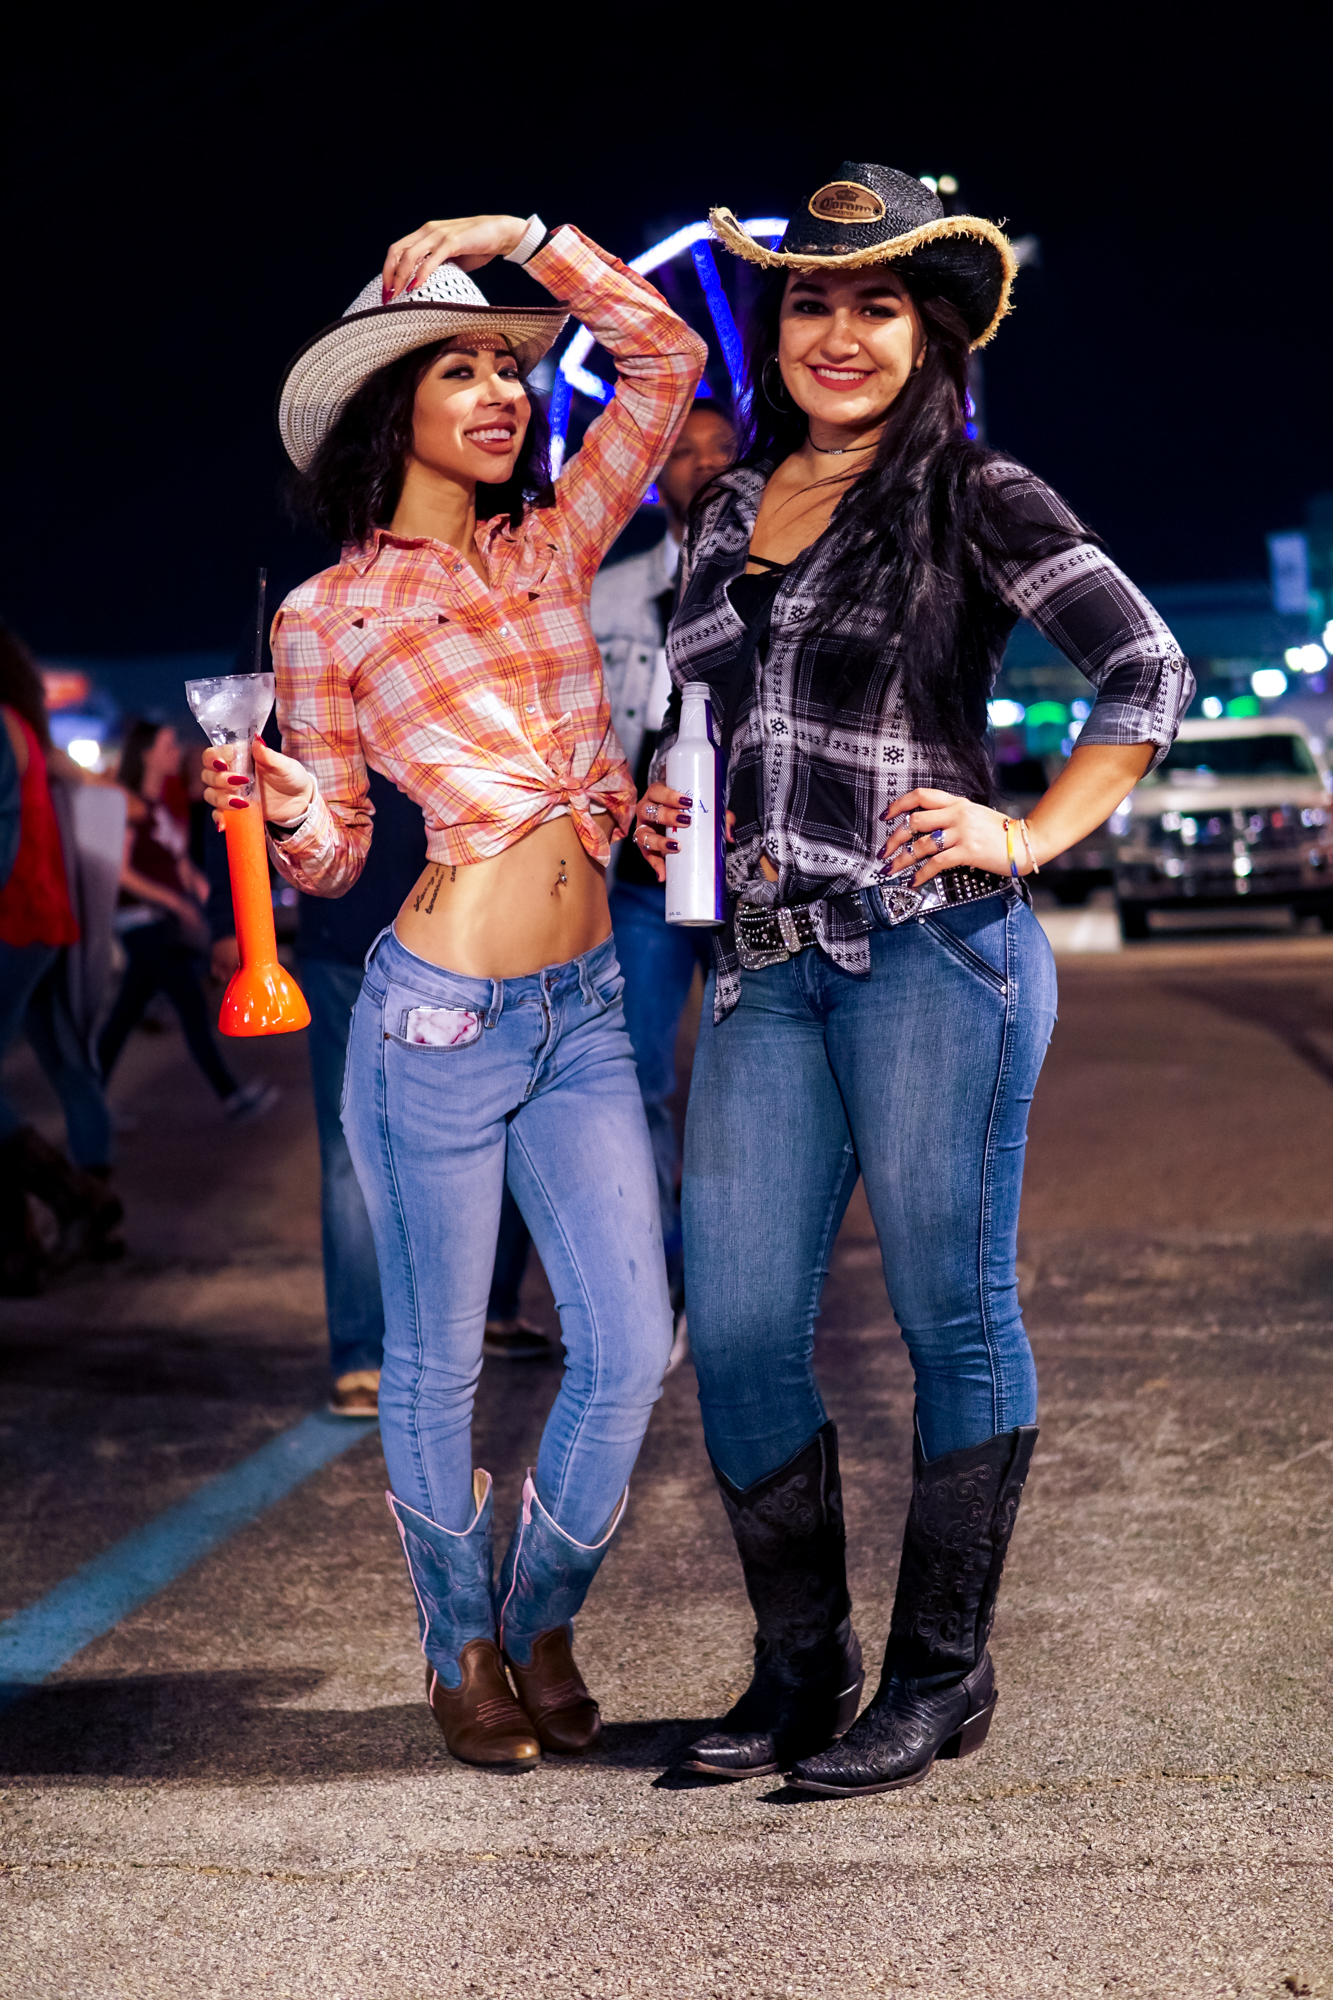 Houstonians show off their best cowboy fashions at RodeoHouston